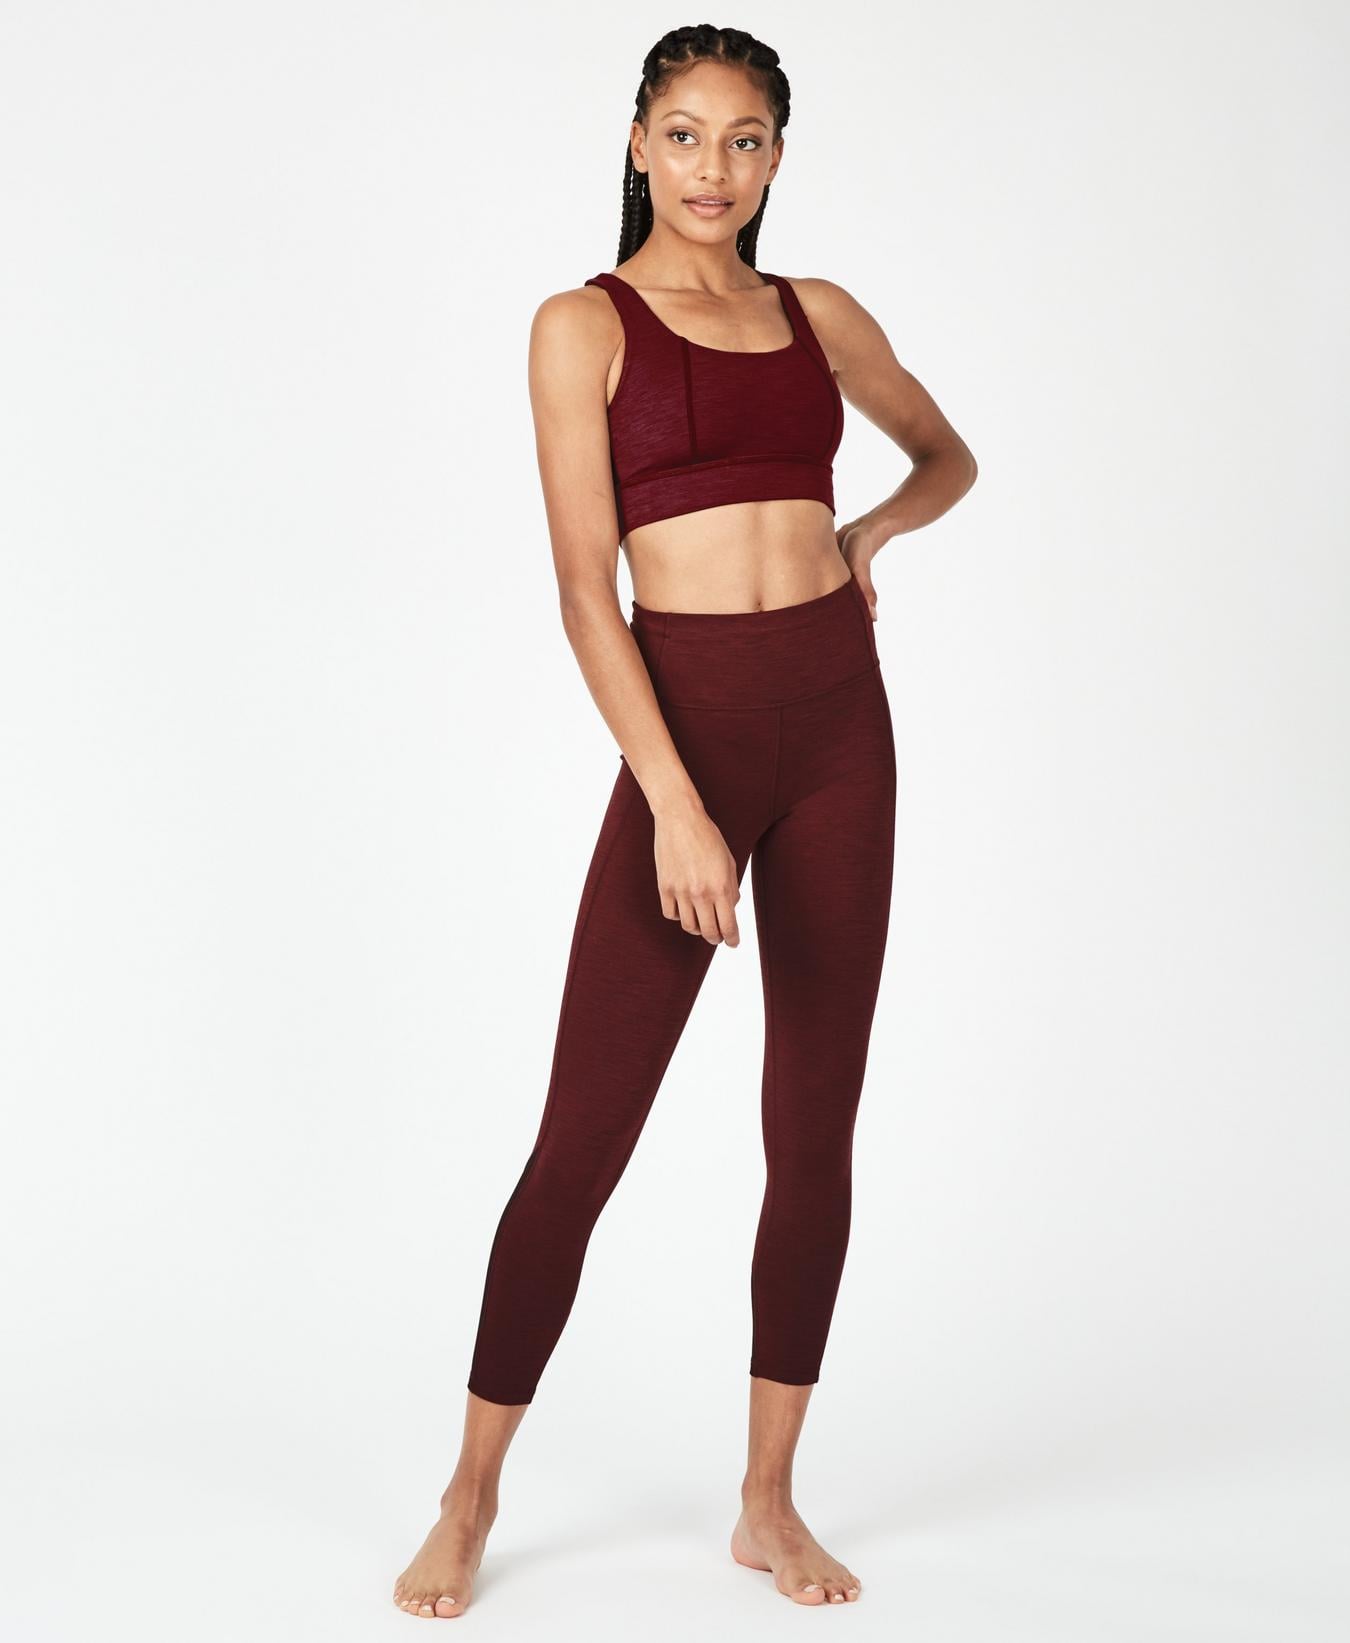 Sweaty Betty Super Sculpt Black Cherry Set, These 10 Matching Workout Sets  Are the Prettiest Gifts For Any Fashionable Fitness Fan